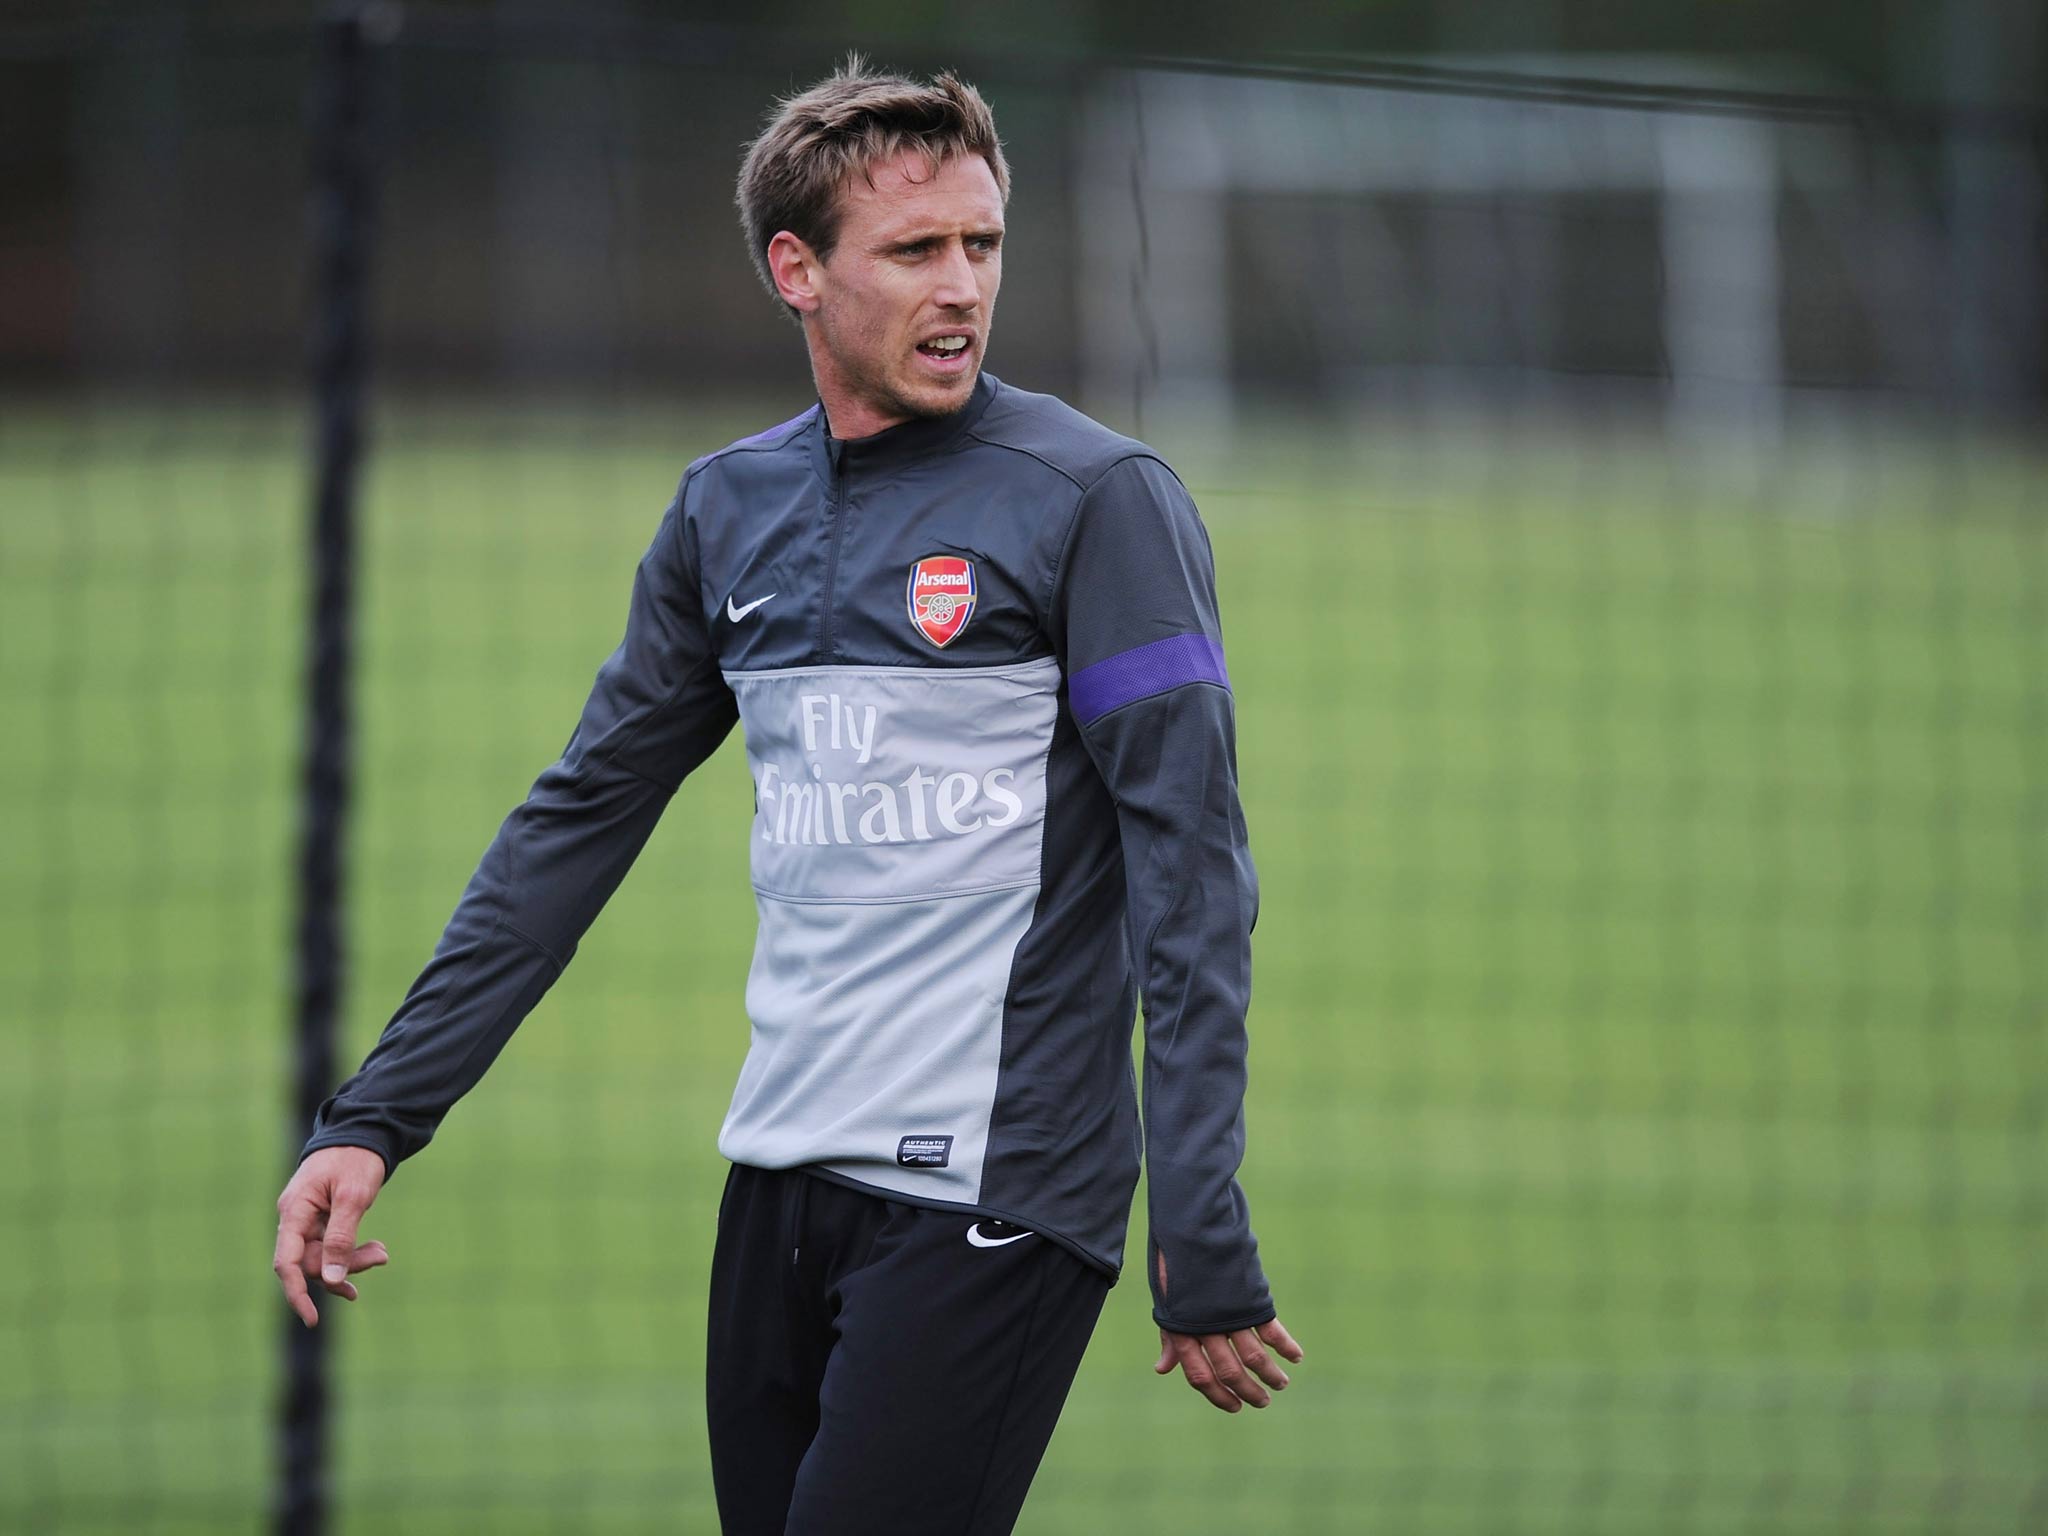 Nacho Monreal takes part in training session